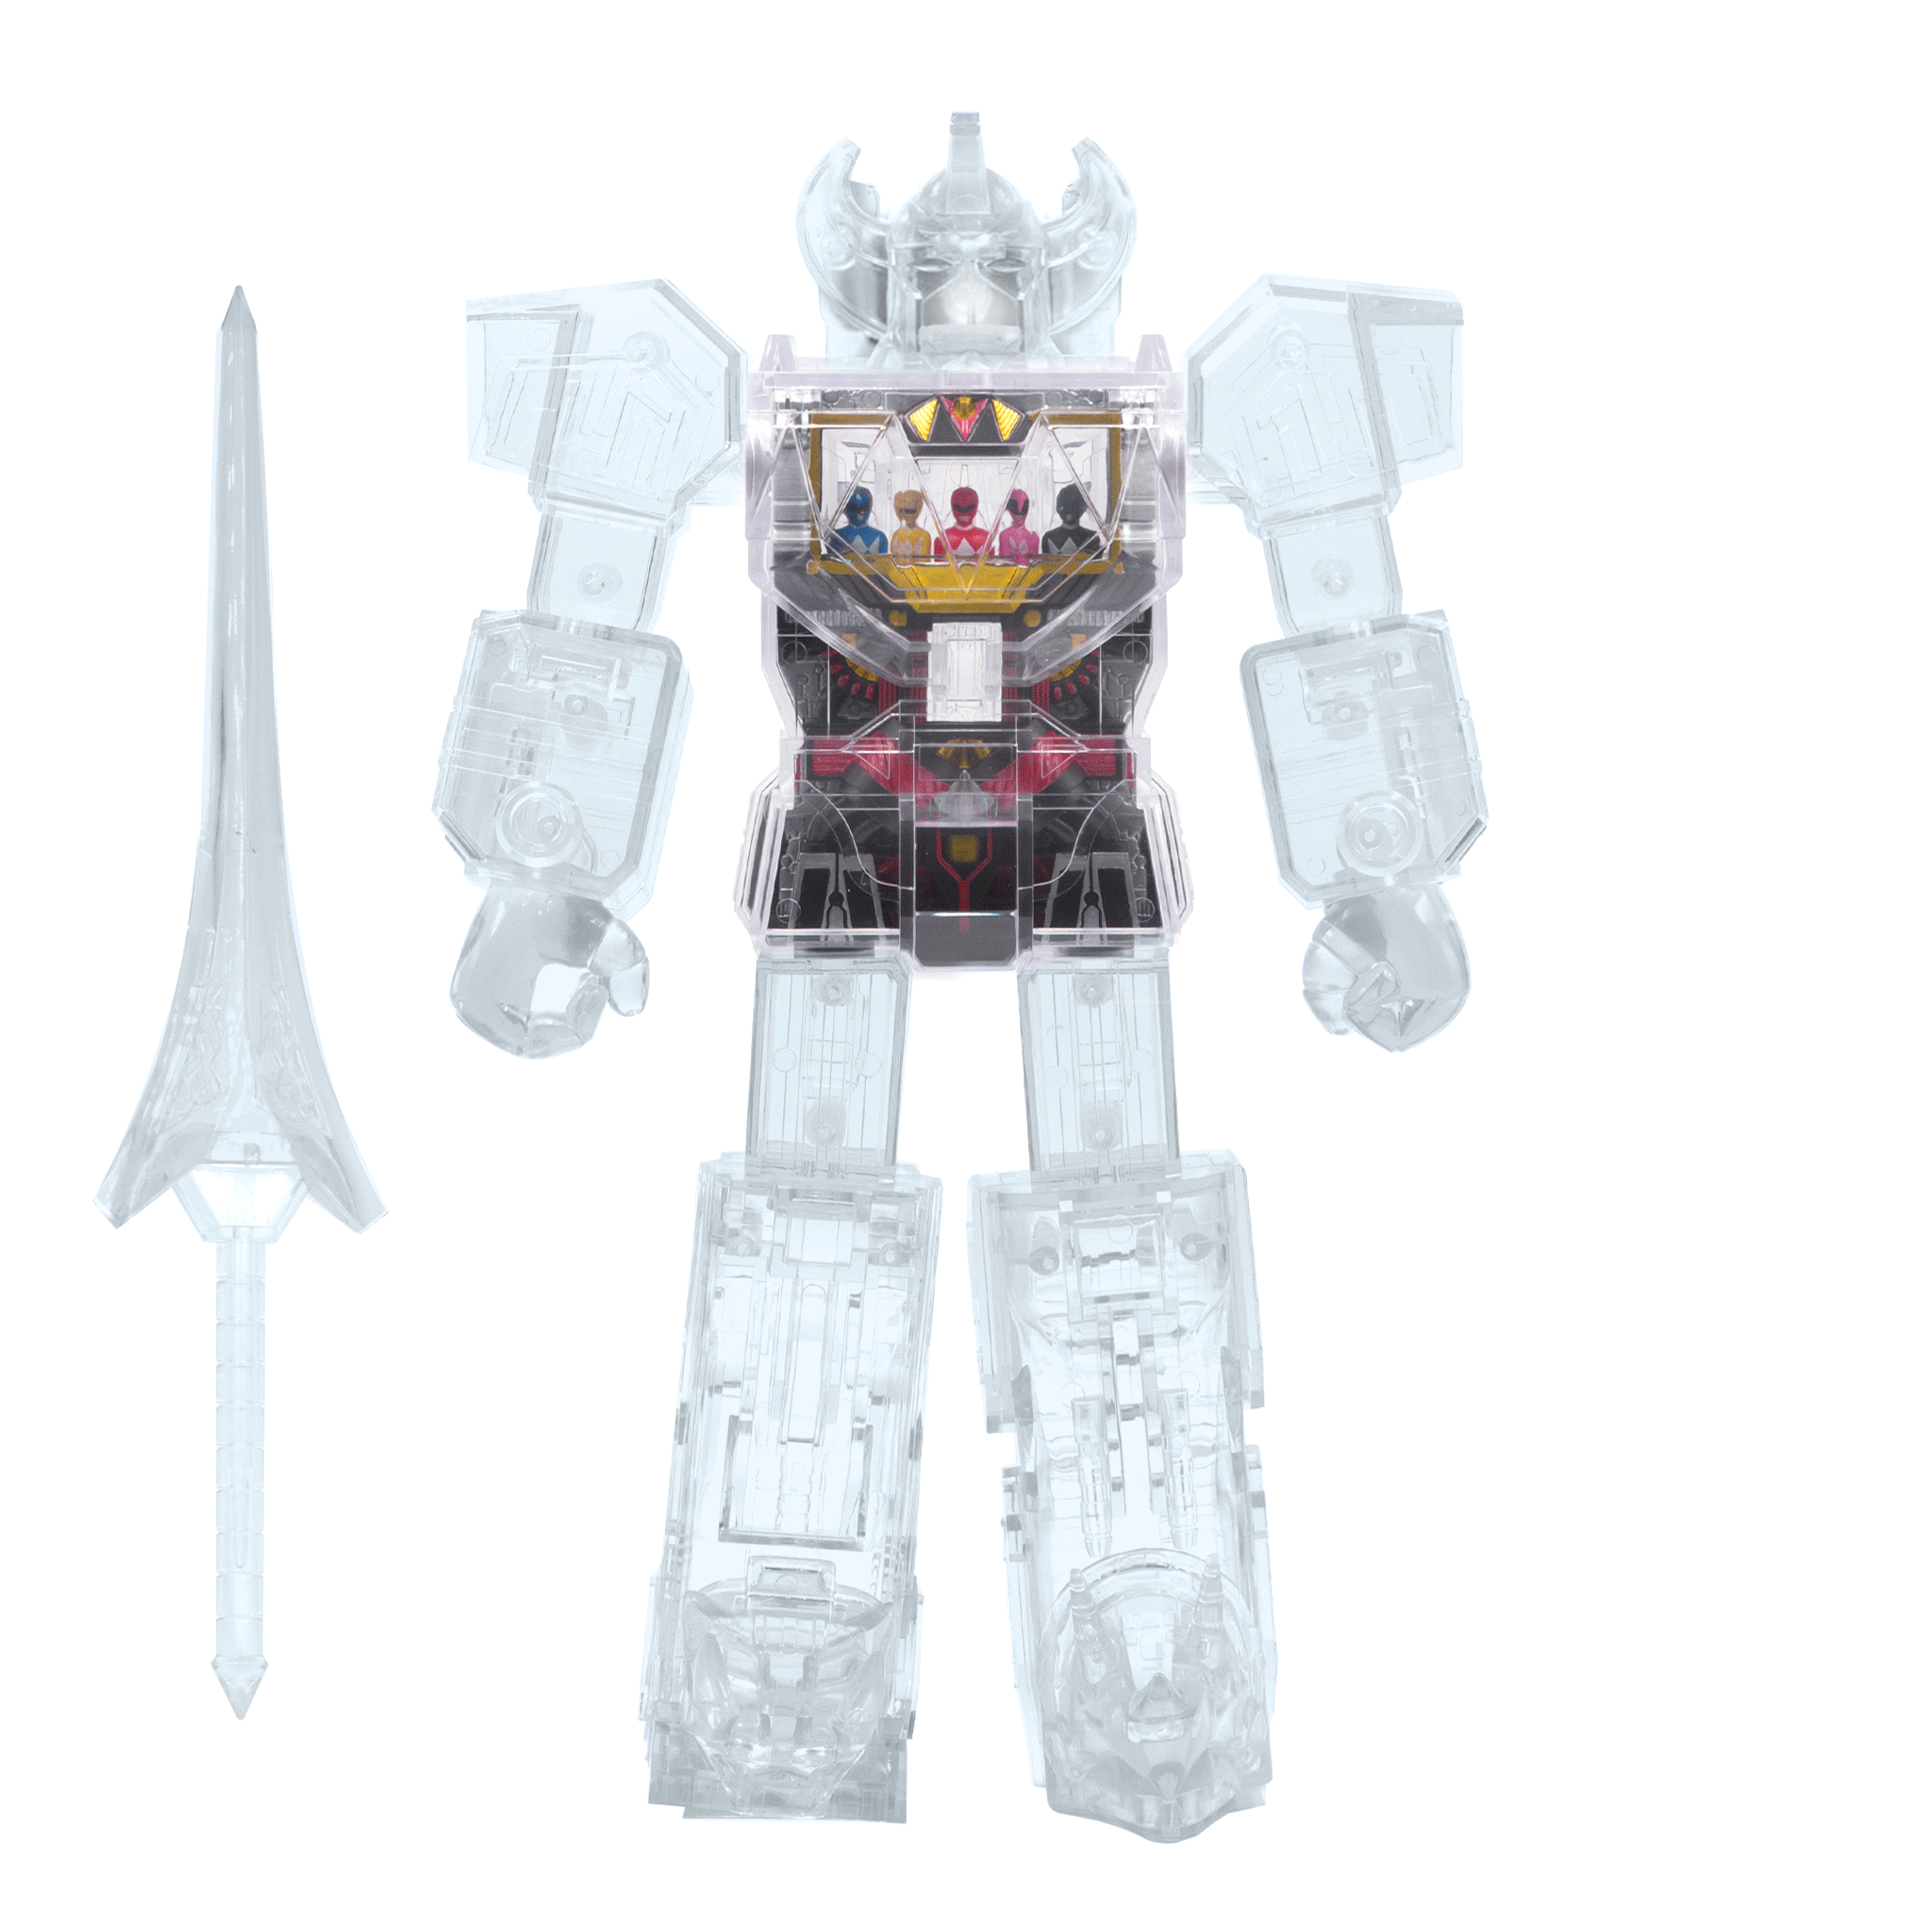 the blot says mighty morphin power rangers super cyborg megazord clear edition figure by super7 angry dean supernatural small